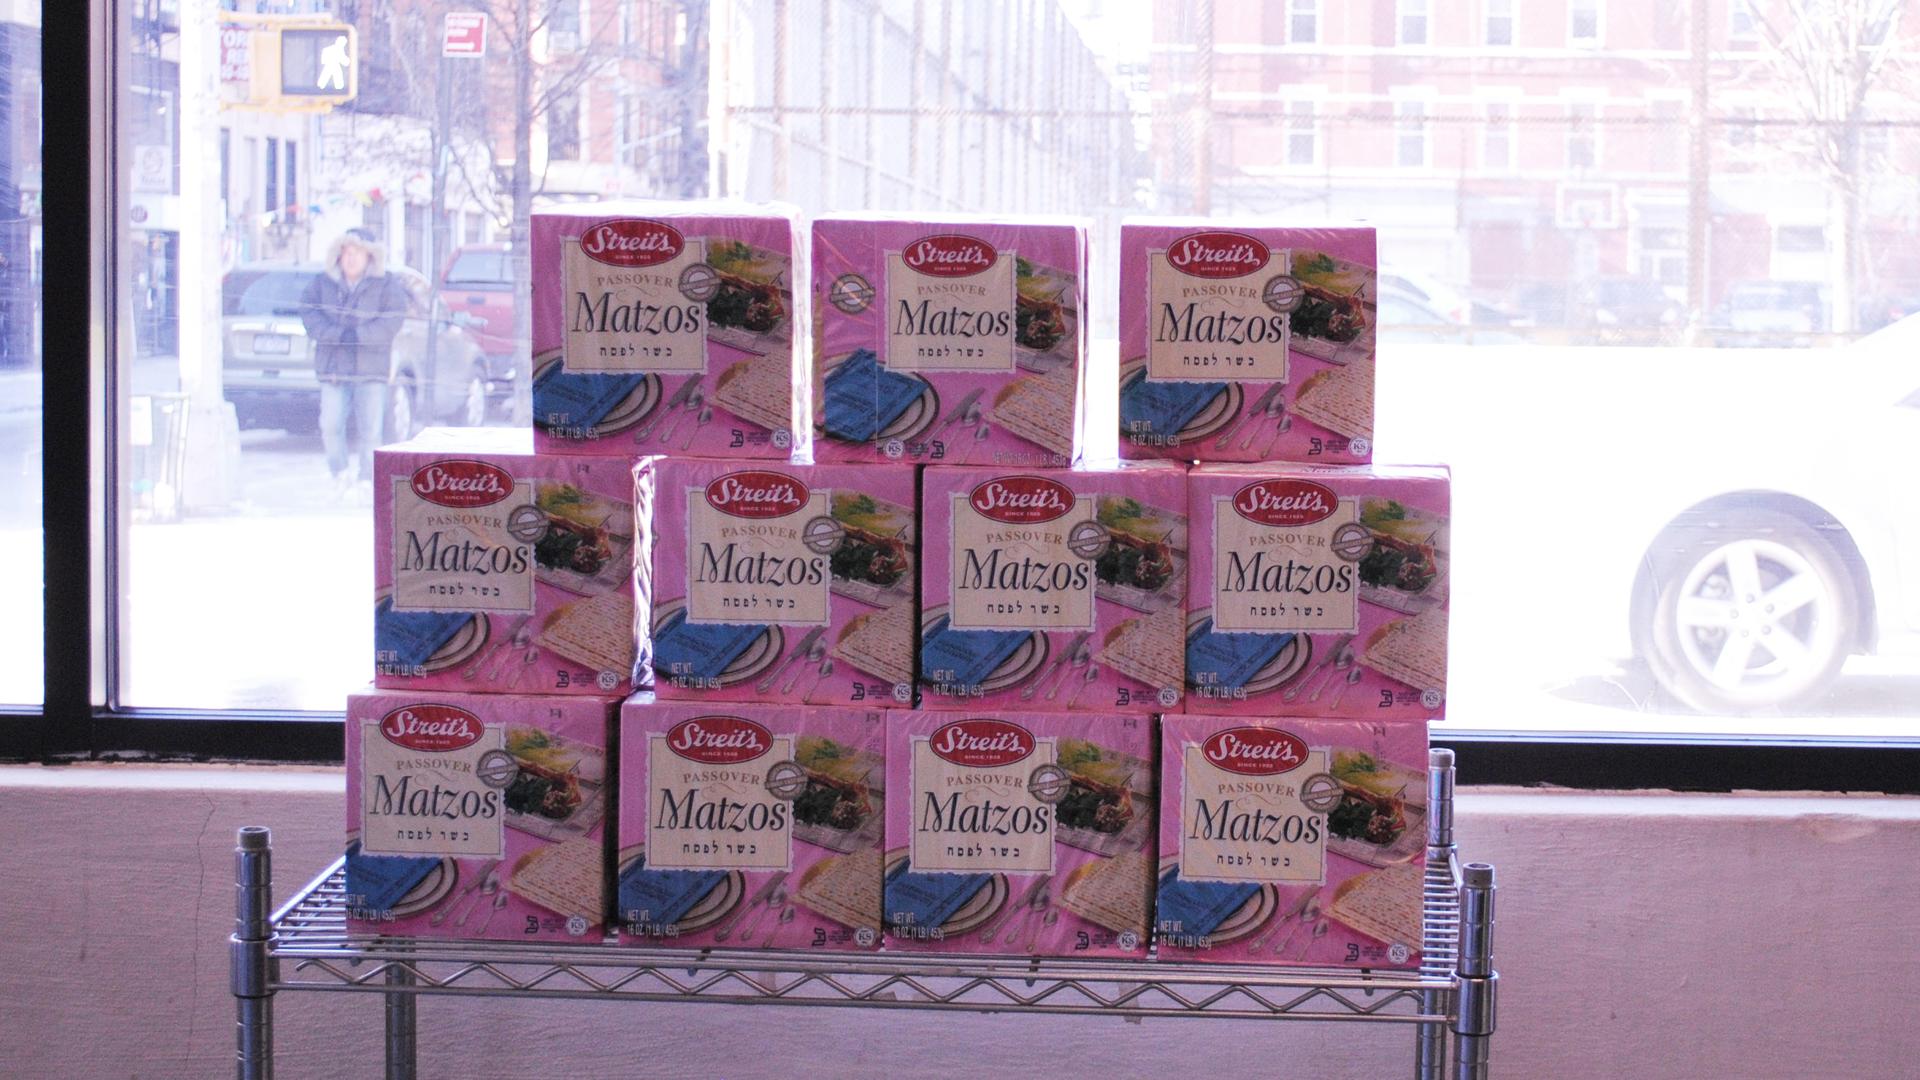 Streit's storefront with boxes of matzo in the signature pink box.